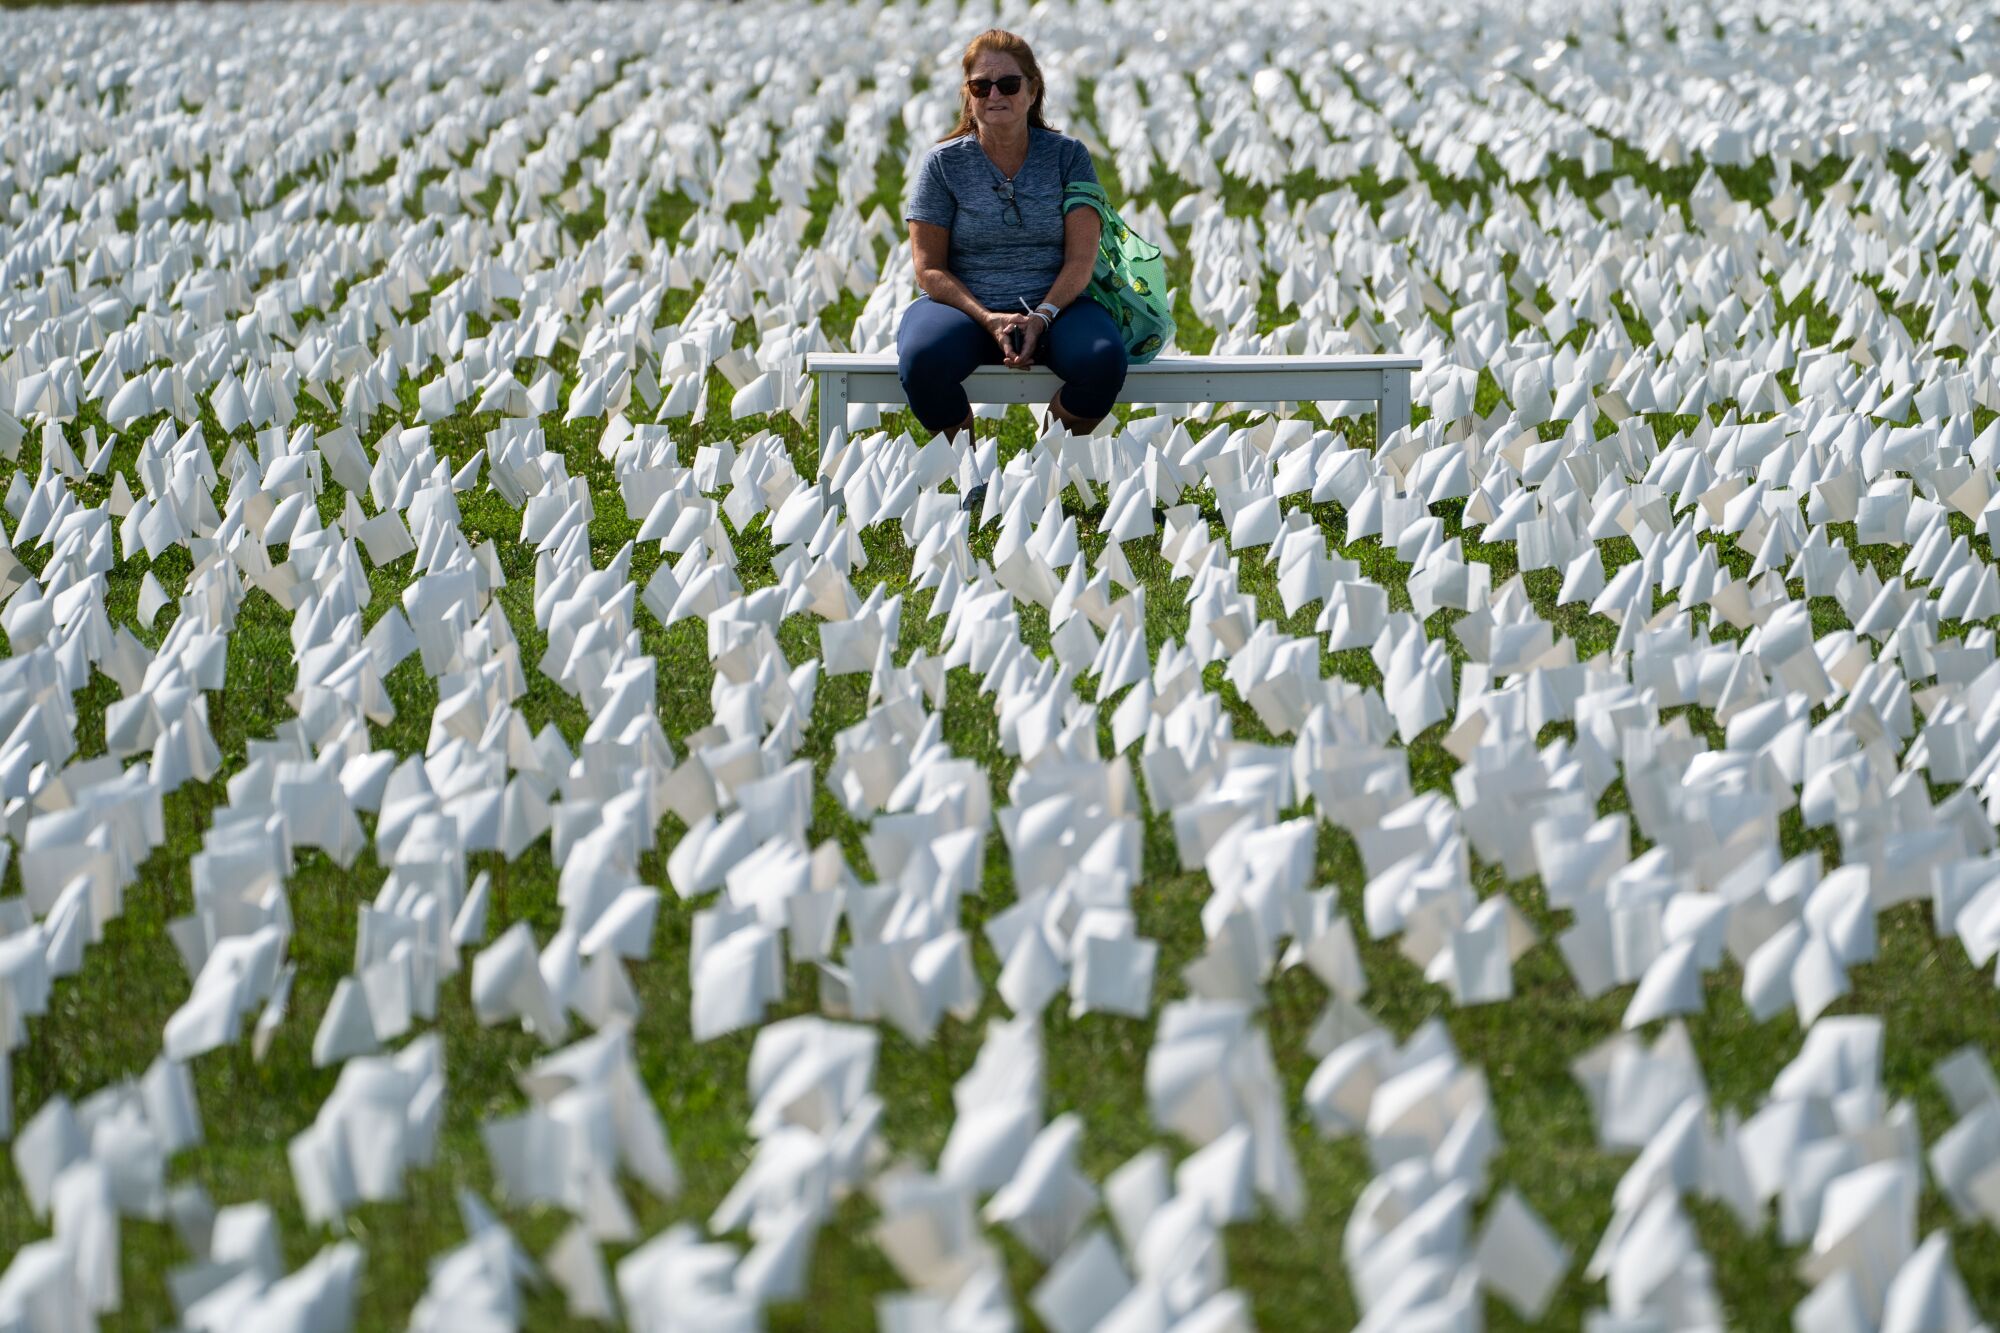 A woman sits on a bench amid rows of small white flags in the grass